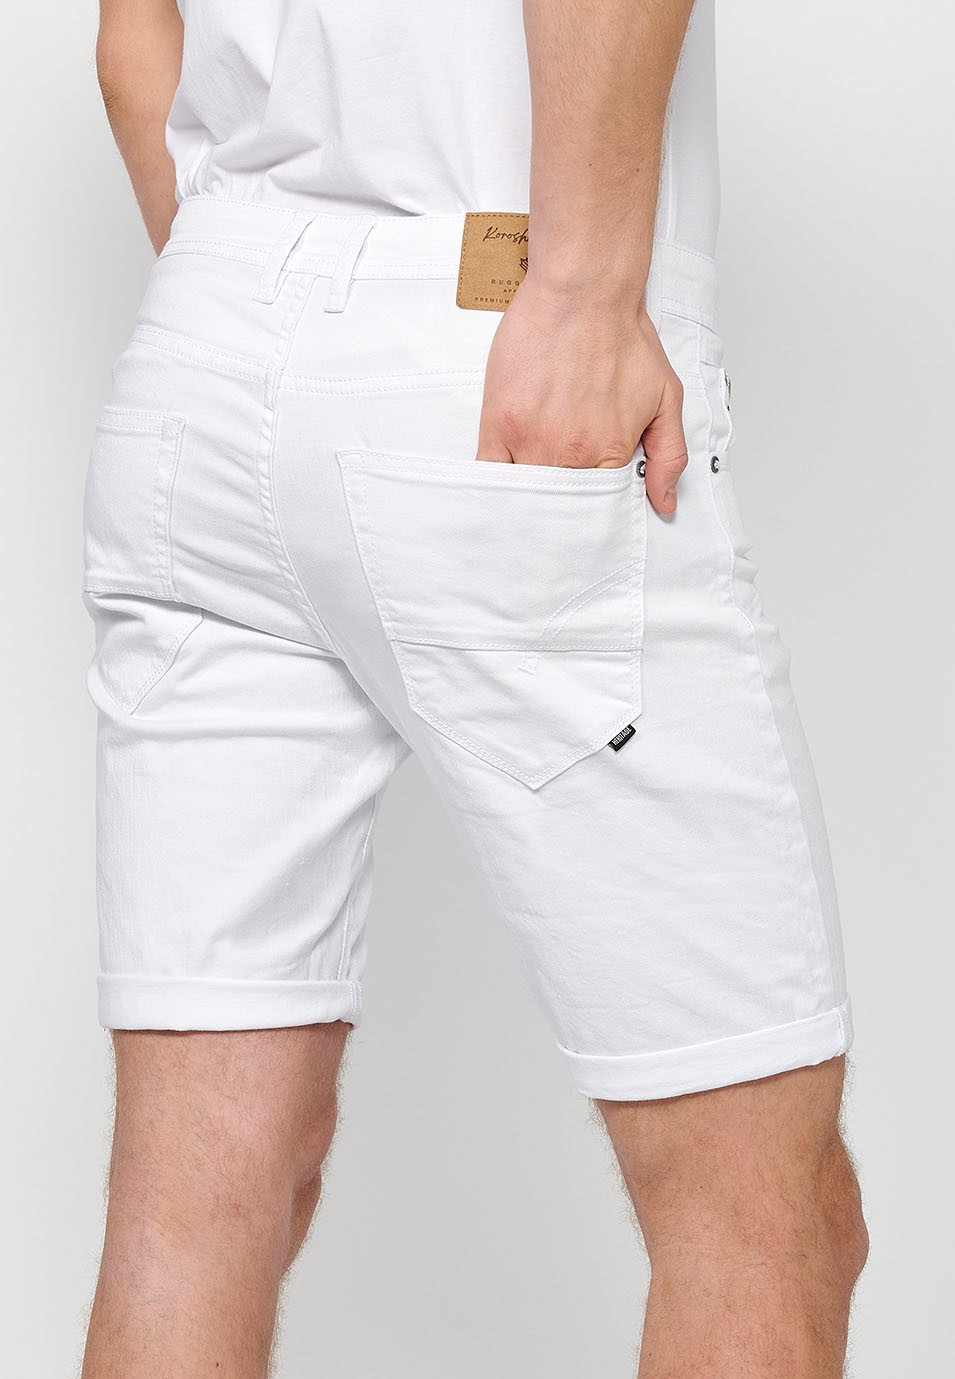 Denim Bermuda shorts with cuffed finish and front zipper and button closure. Five pockets, one match pocket, White for Men 7